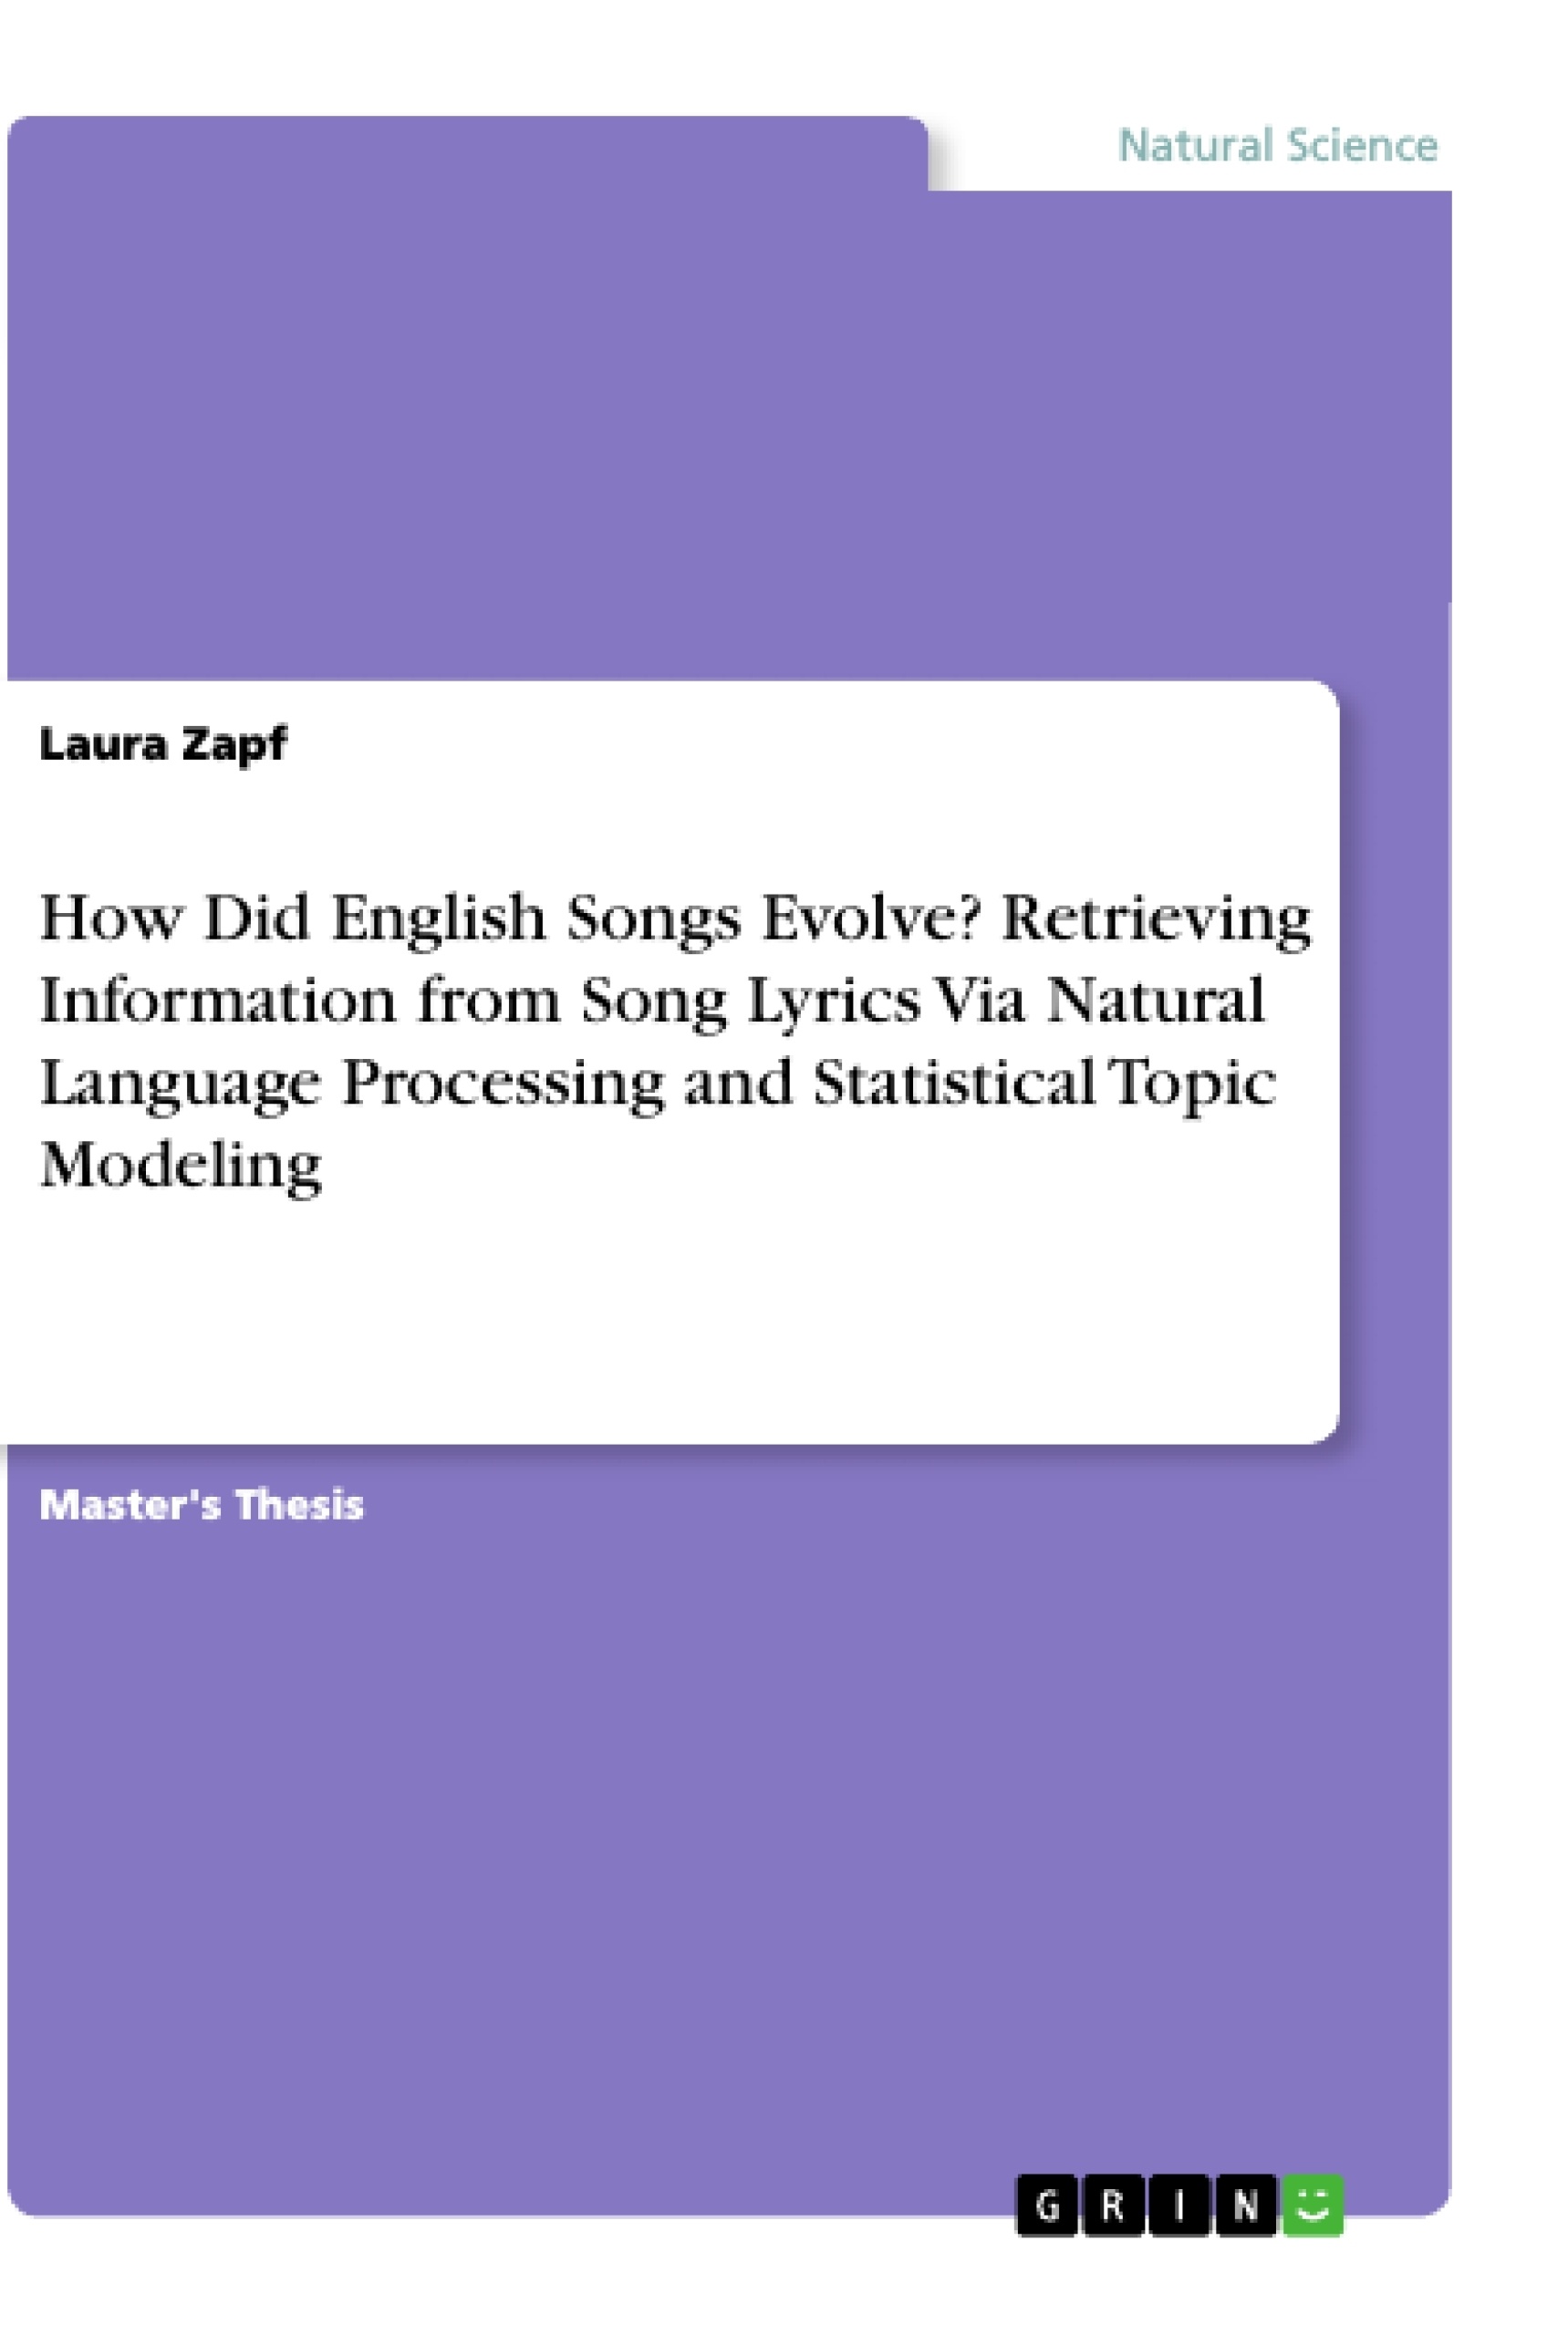 Evolve?　Natural　Information　Via　Lyrics　How　Processing　from　and　Songs　English　Did　Retrieving　Modeling　Statistical　Song　Topic　Language　GRIN